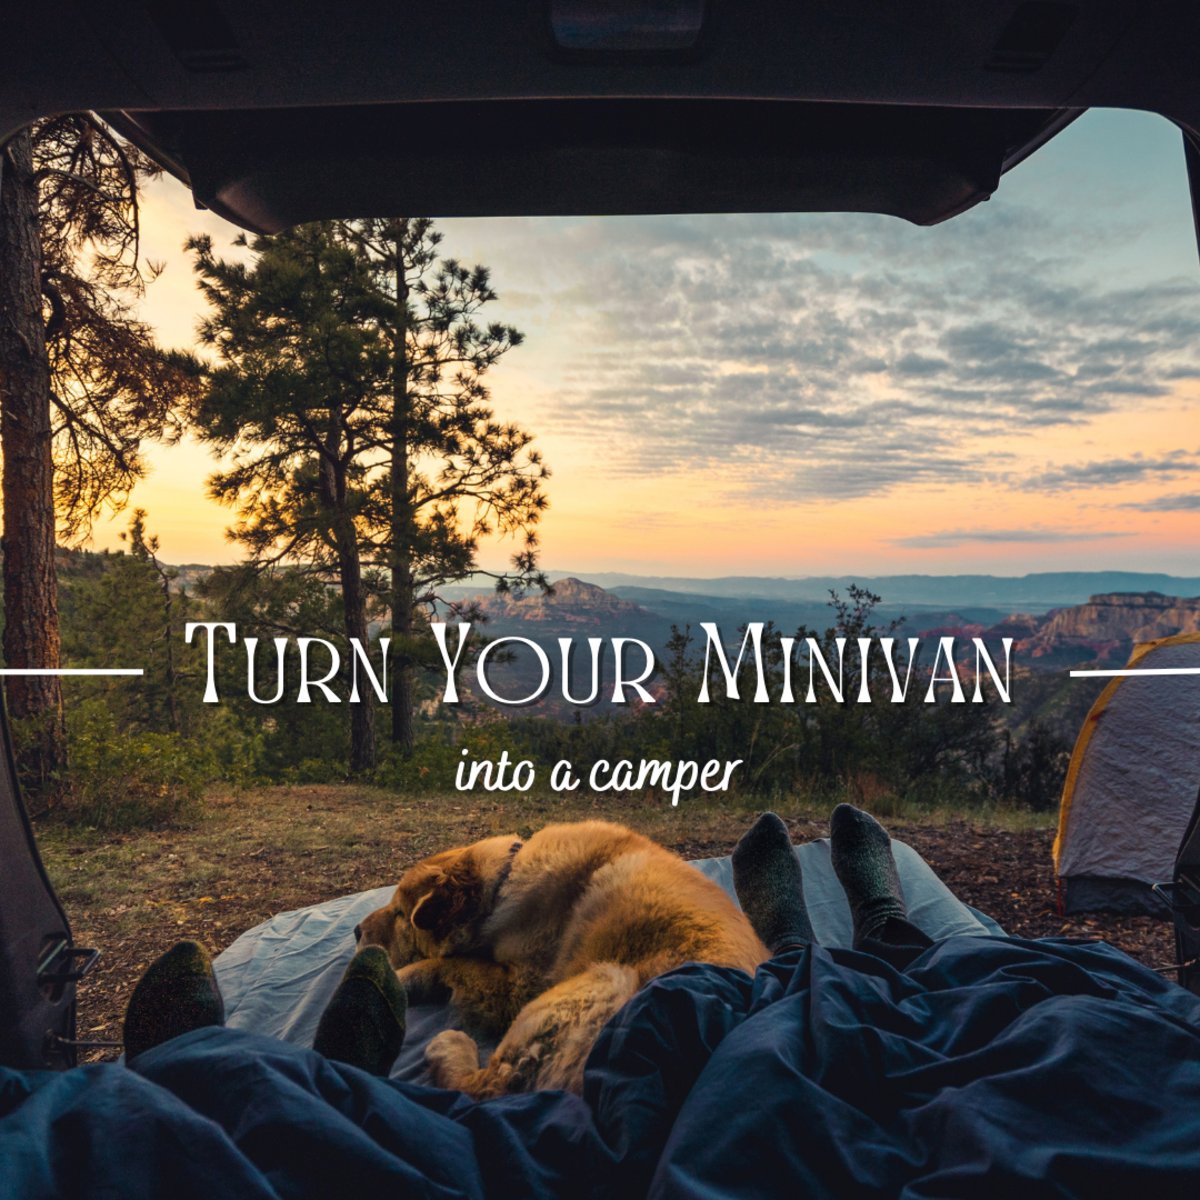 Turn Your Minivan Into a Camper!